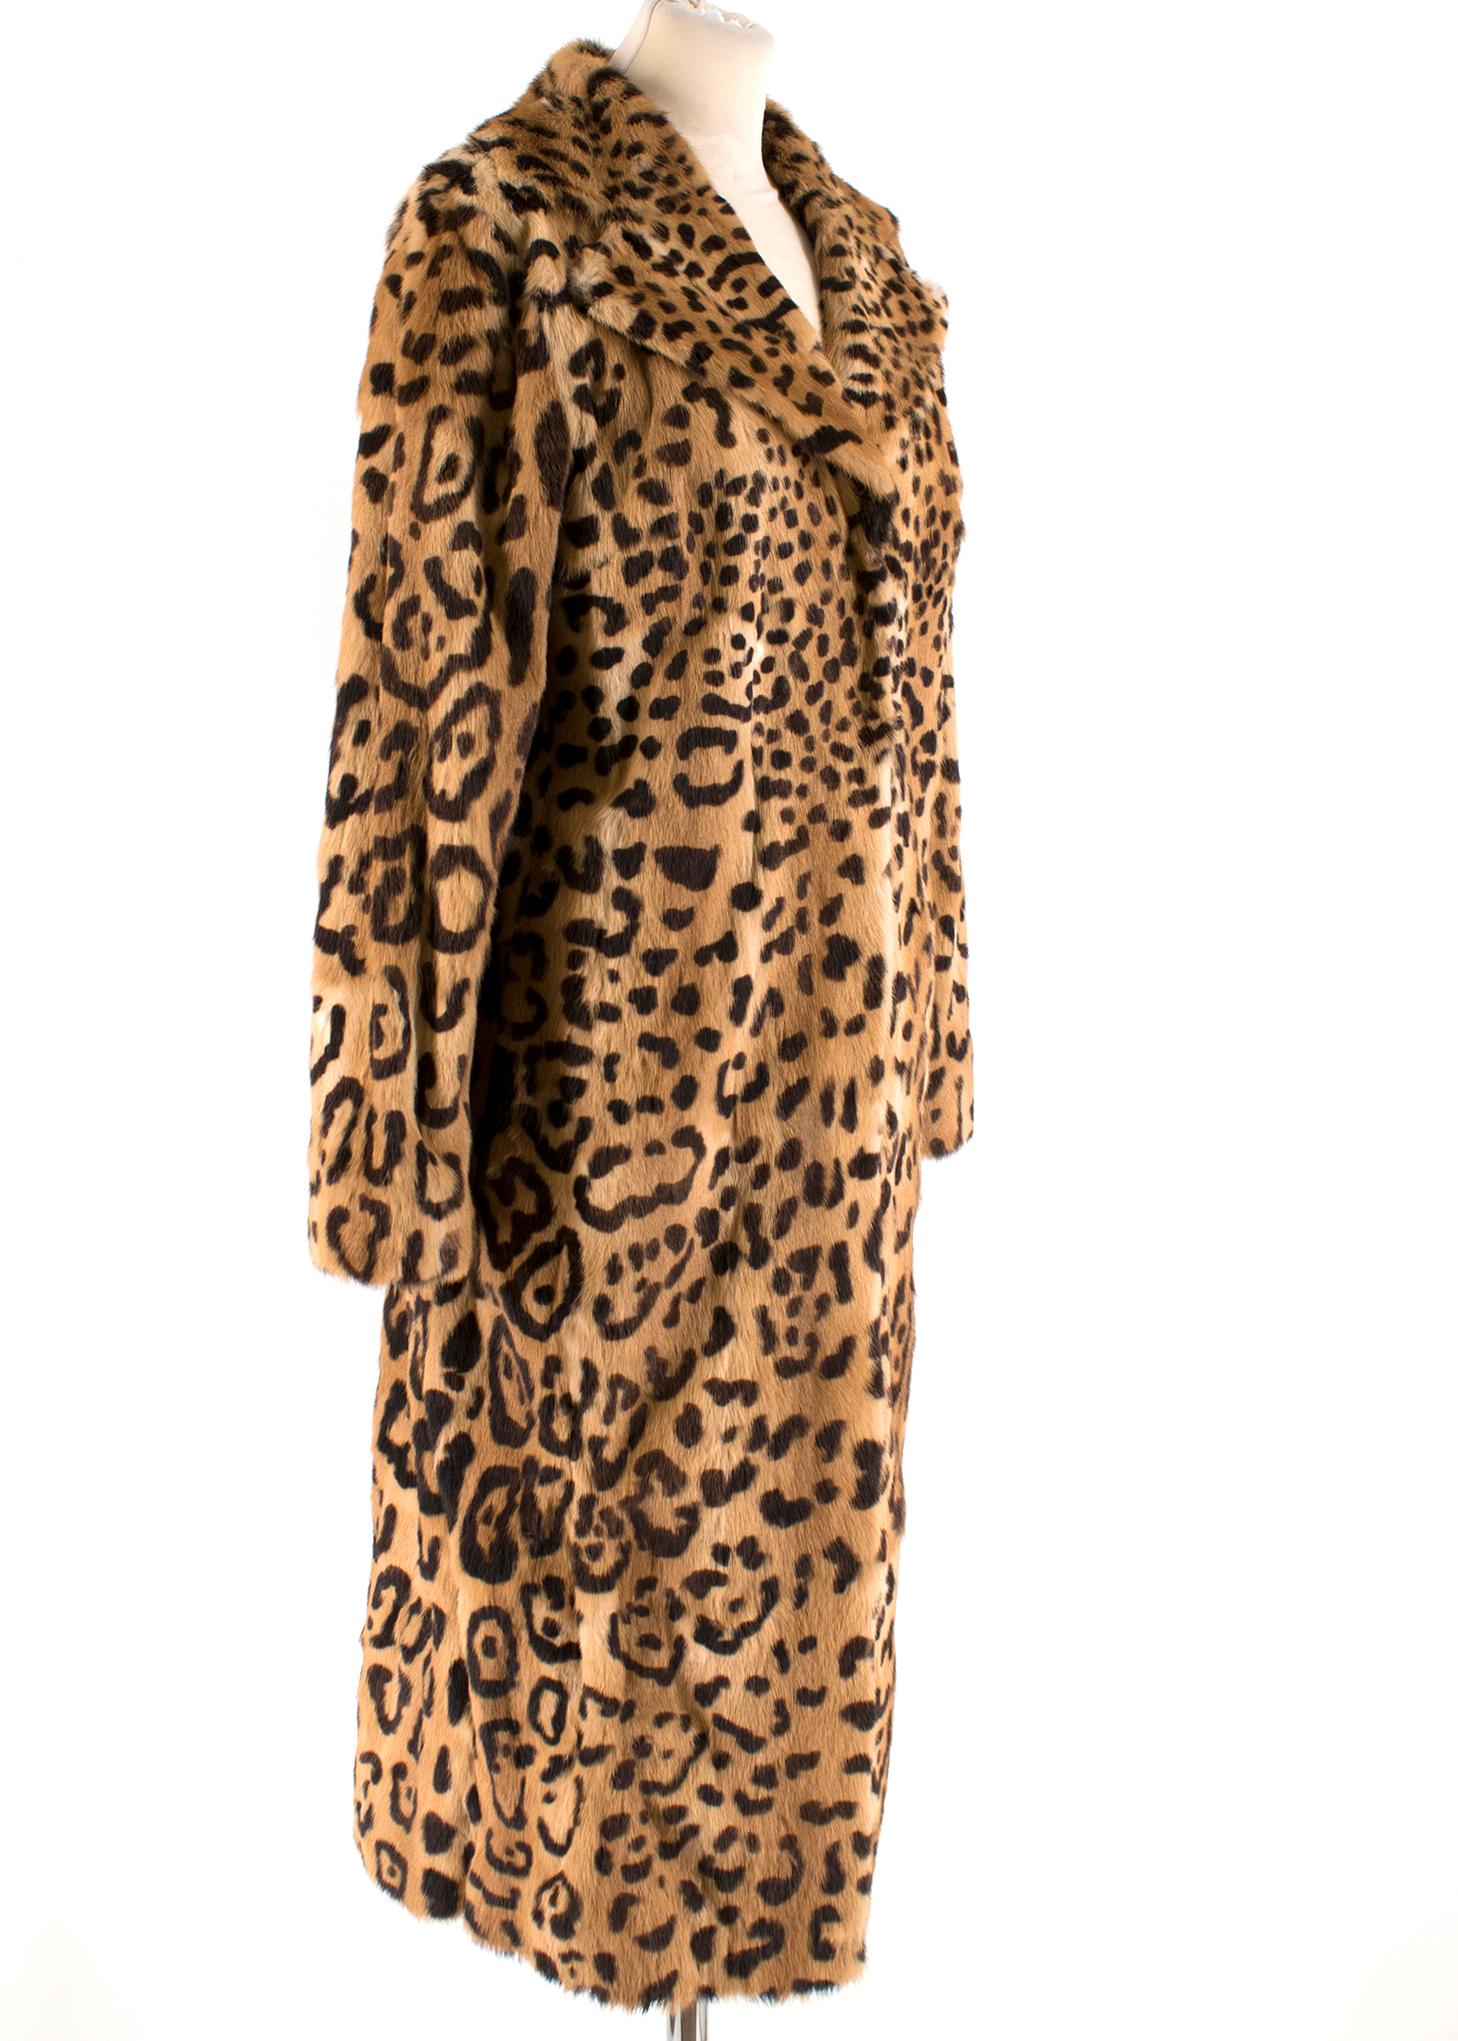 Dolce & Gabbana Kolinsky Fur Long Animal Print Coat 

- Snap Button Front Closure 
- Long Sleeves
- Leather Lined Side Pockets 
- Silk Blend Lining 
- Collar 

Specialist Clean Only 

Made in Italy 

Please note, these items are pre-owned and may